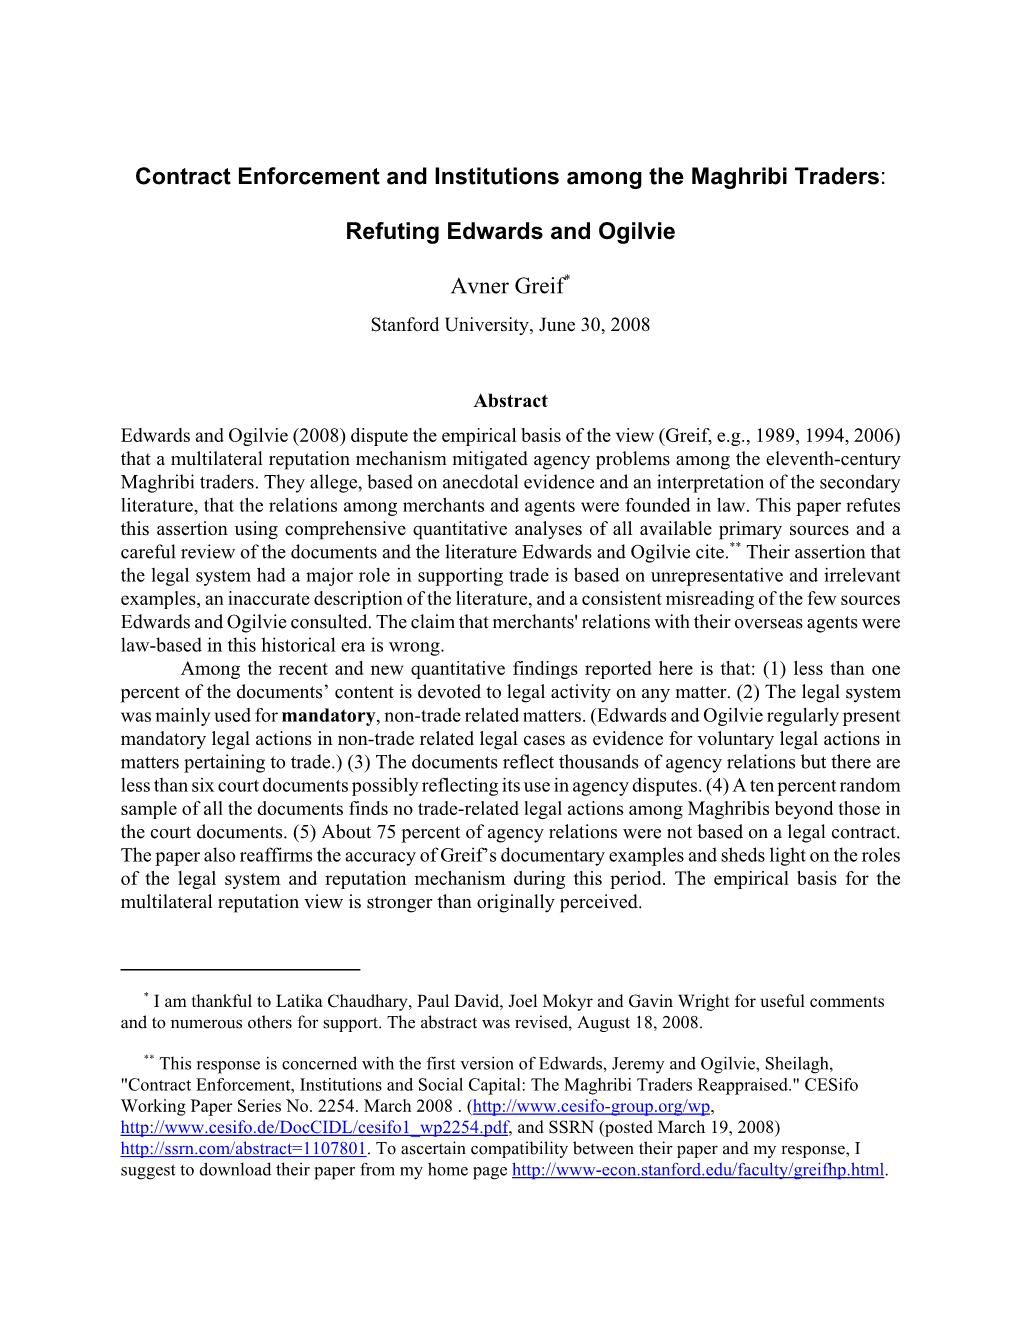 Contract Enforcement and Institutions Among the Maghribi Traders